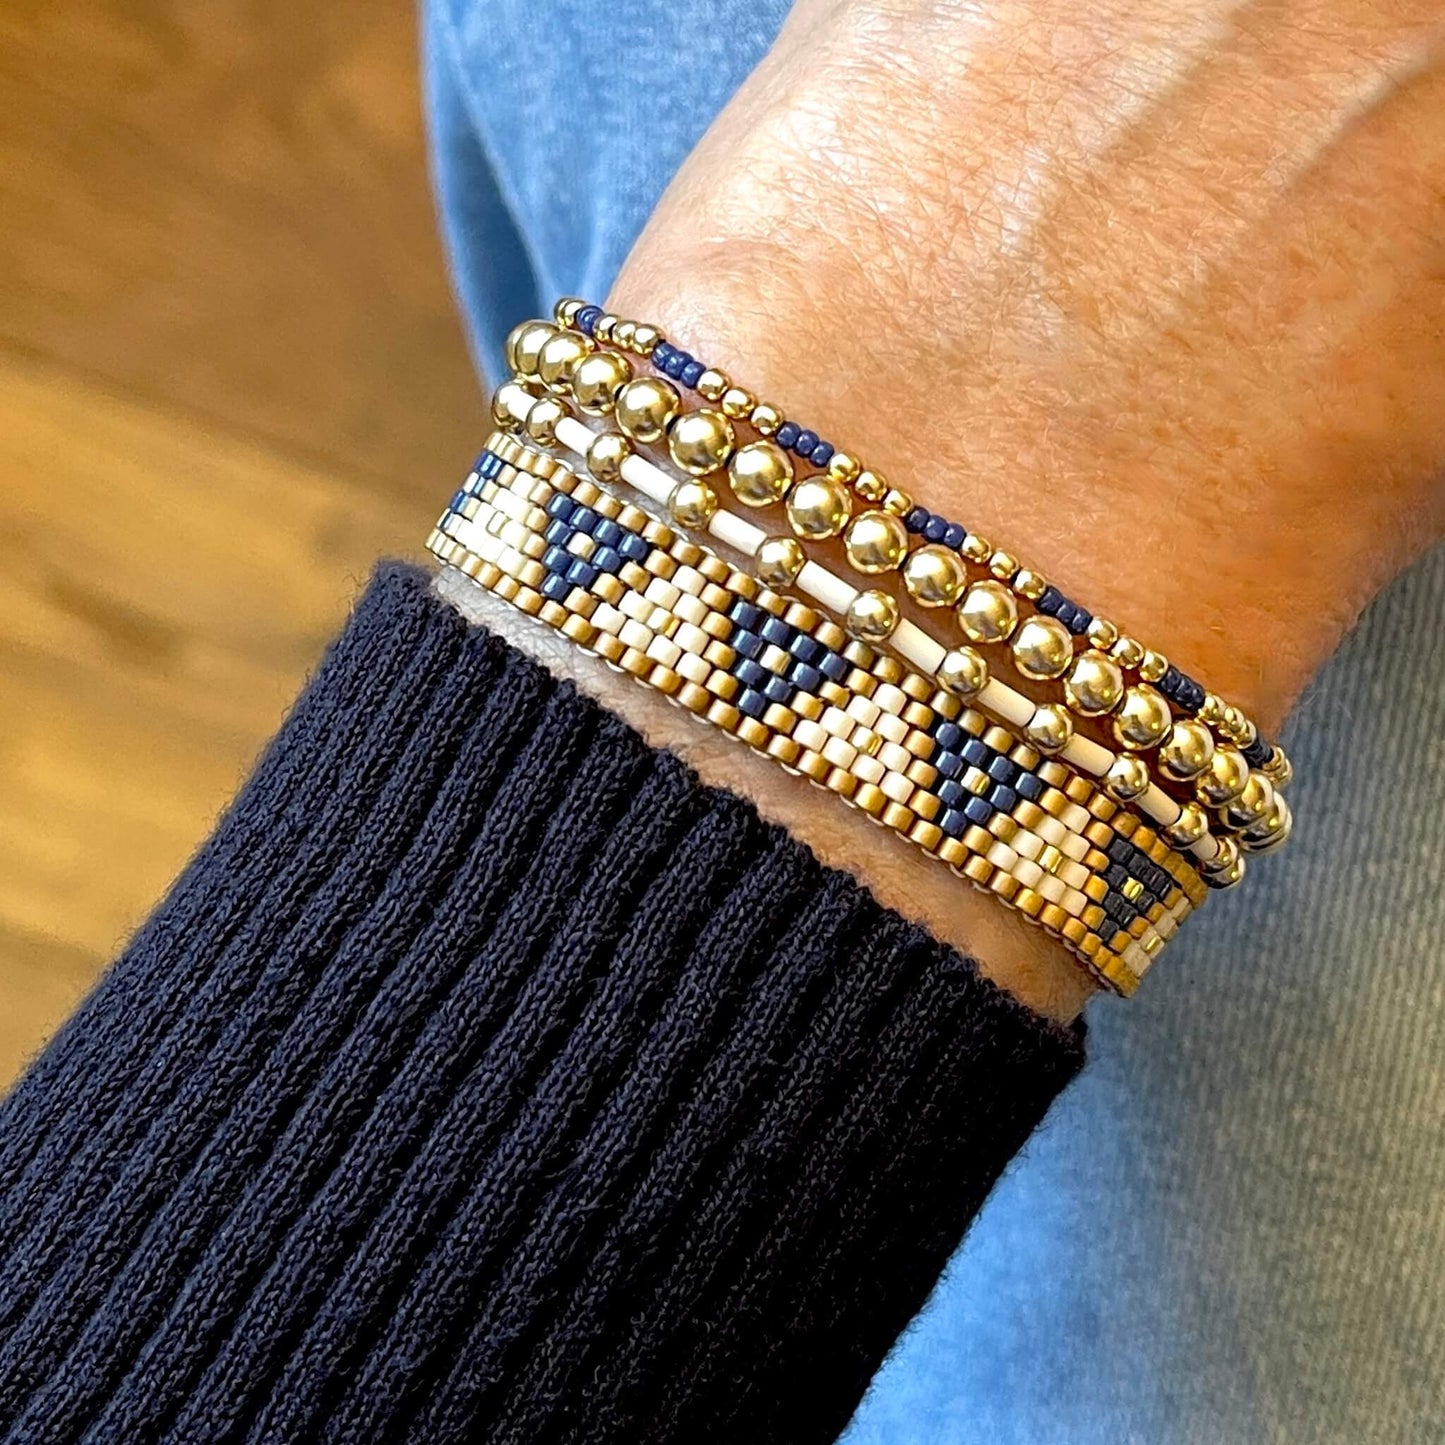 Women's blue, white, and gold beaded bracelet stack with woven triangle band and 3 gold ball stretch bracelets.